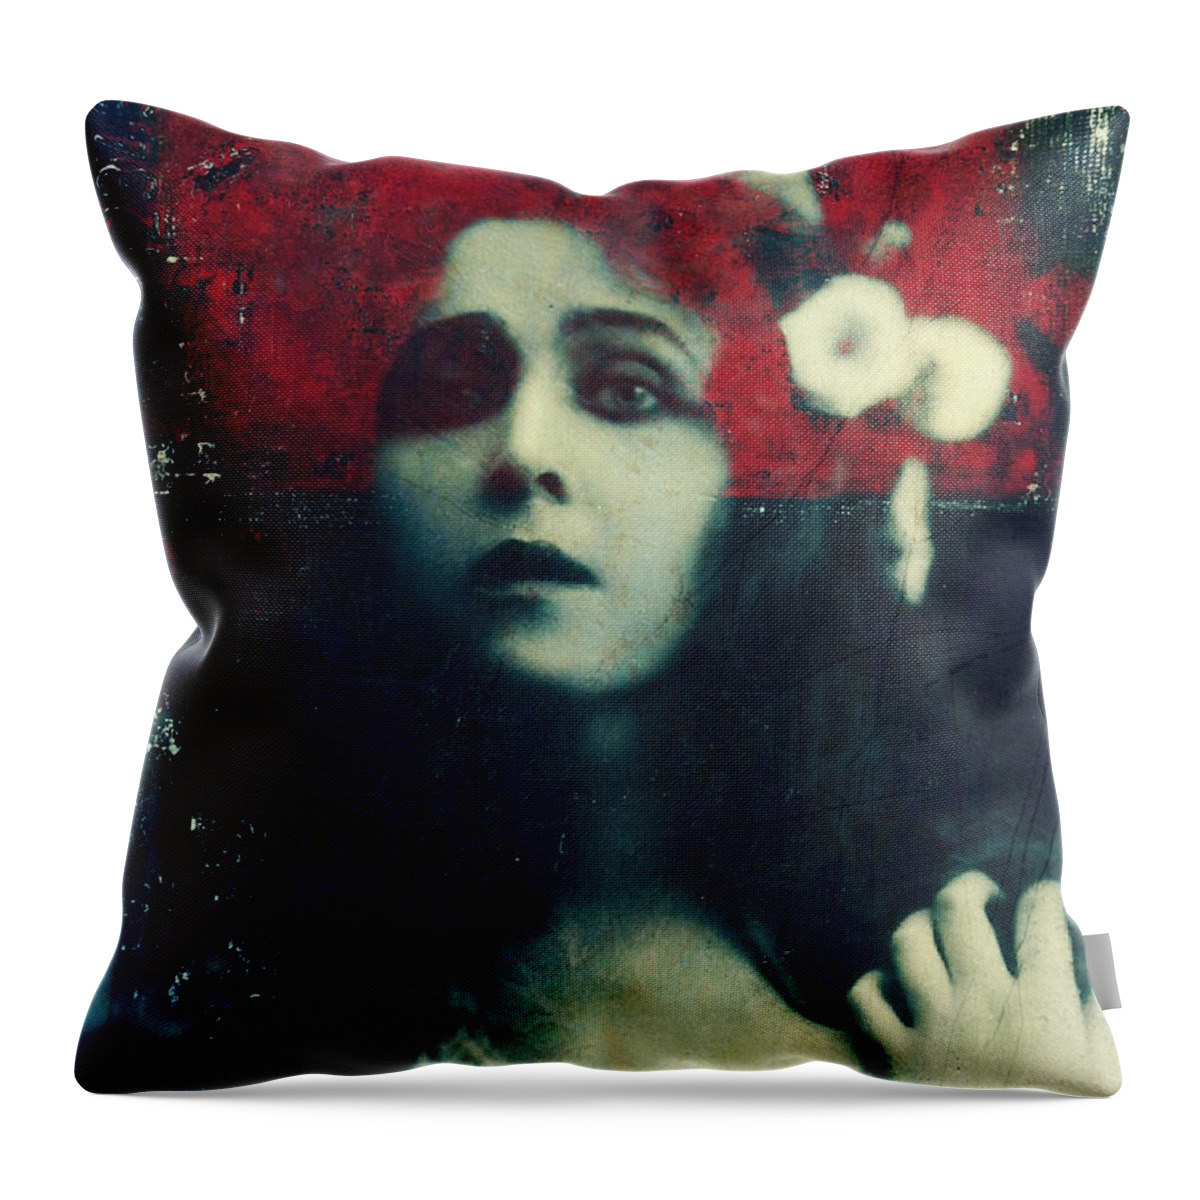 Vintage Throw Pillow featuring the mixed media Funny How Love Can Be by Paul Lovering